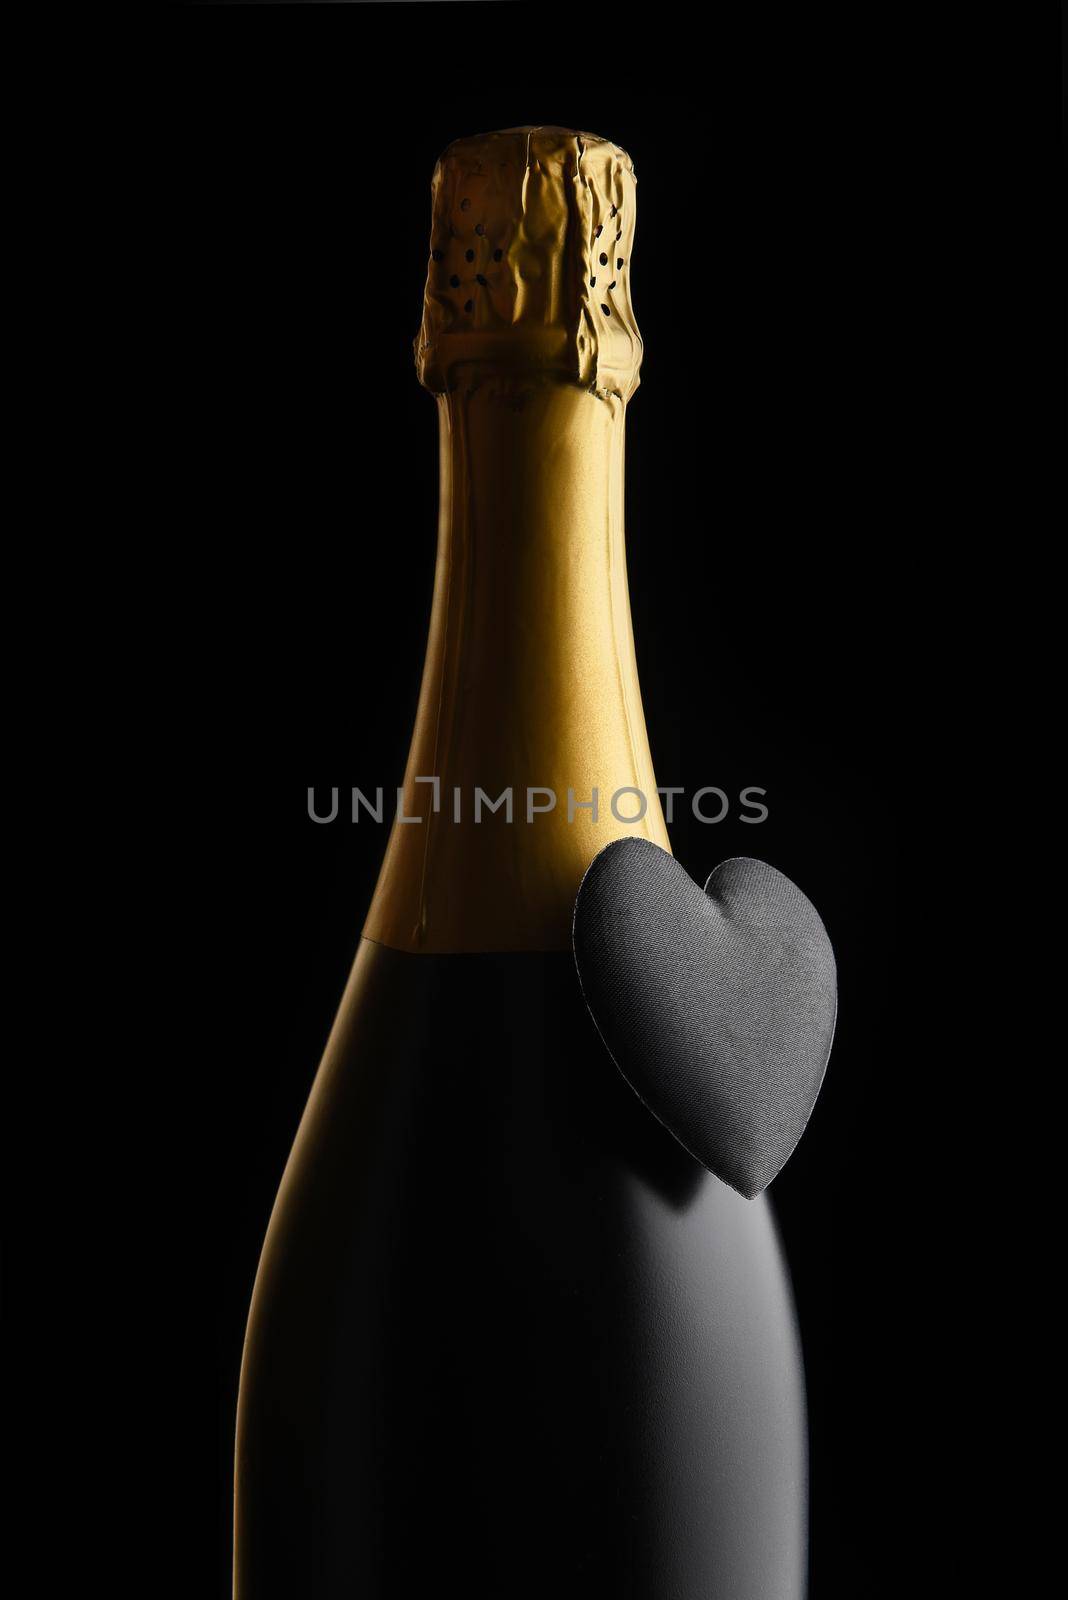 Valentines Day Concept: Closeup of a bottle of Champagne with a black heart against a black background.